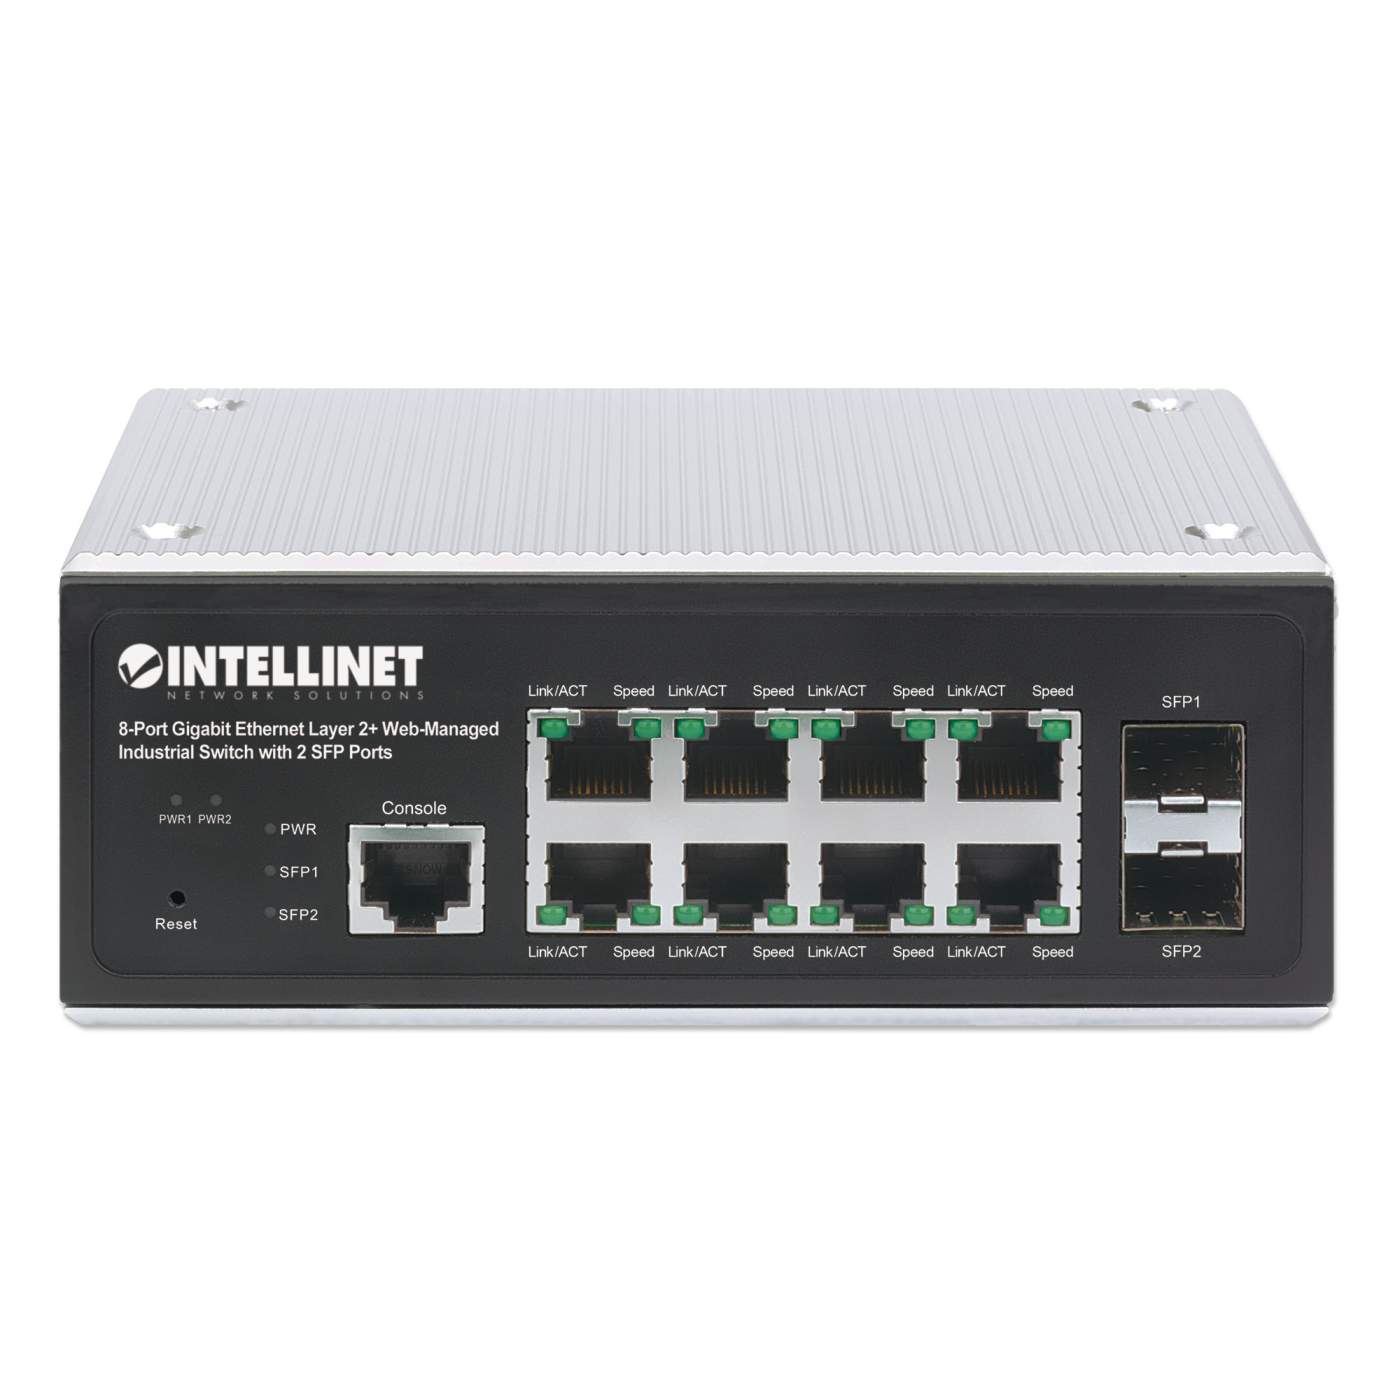 Industrial 8-Port Gigabit Ethernet Layer 2+ Web-Managed Switch with 2 SFP Ports Image 4